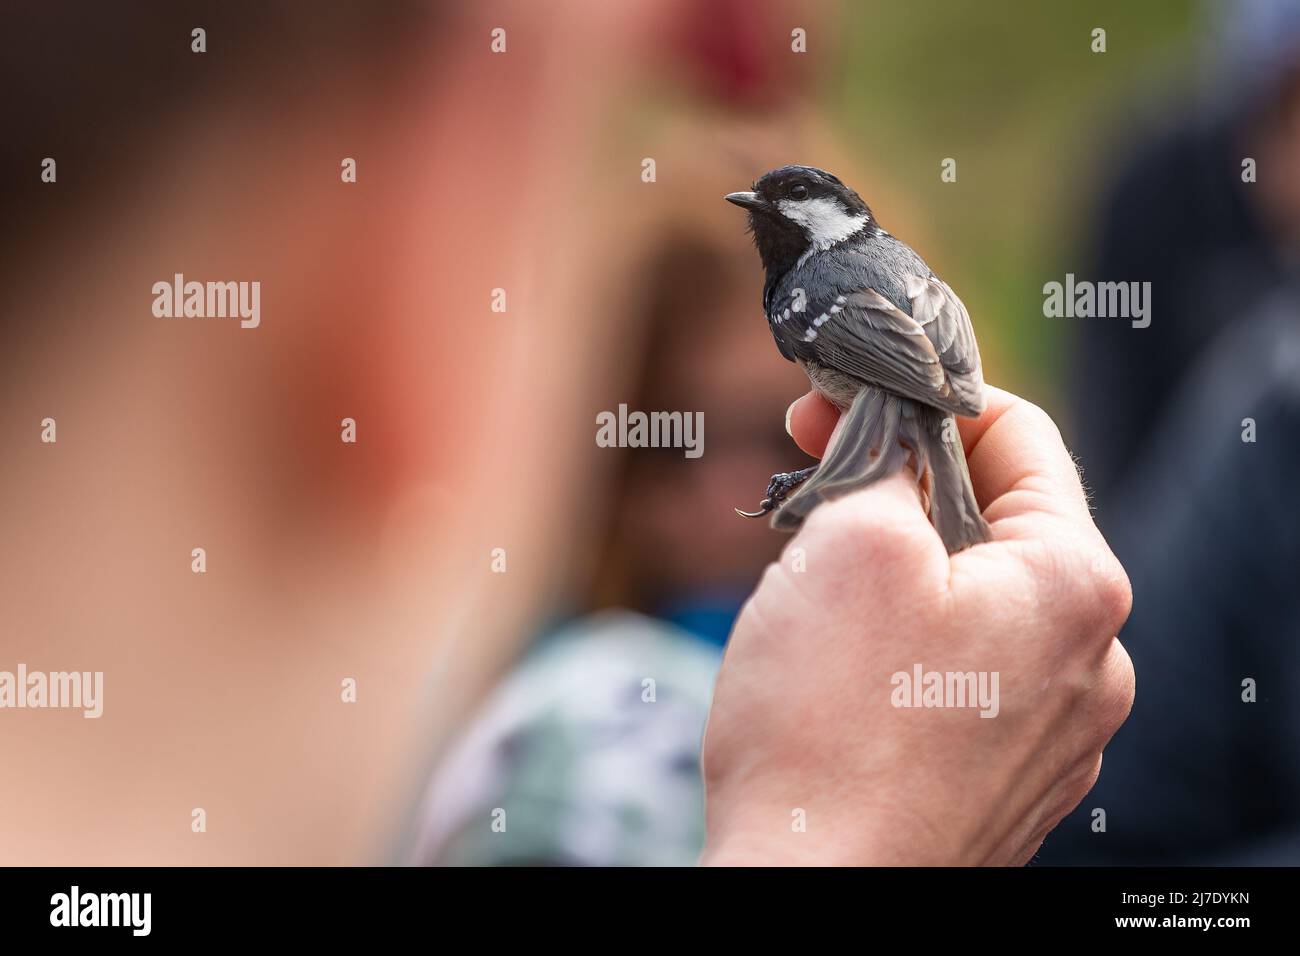 The coal tit, a small grey, black and white passerine bird being held in a hand. Blurry background and foreground. Stock Photo